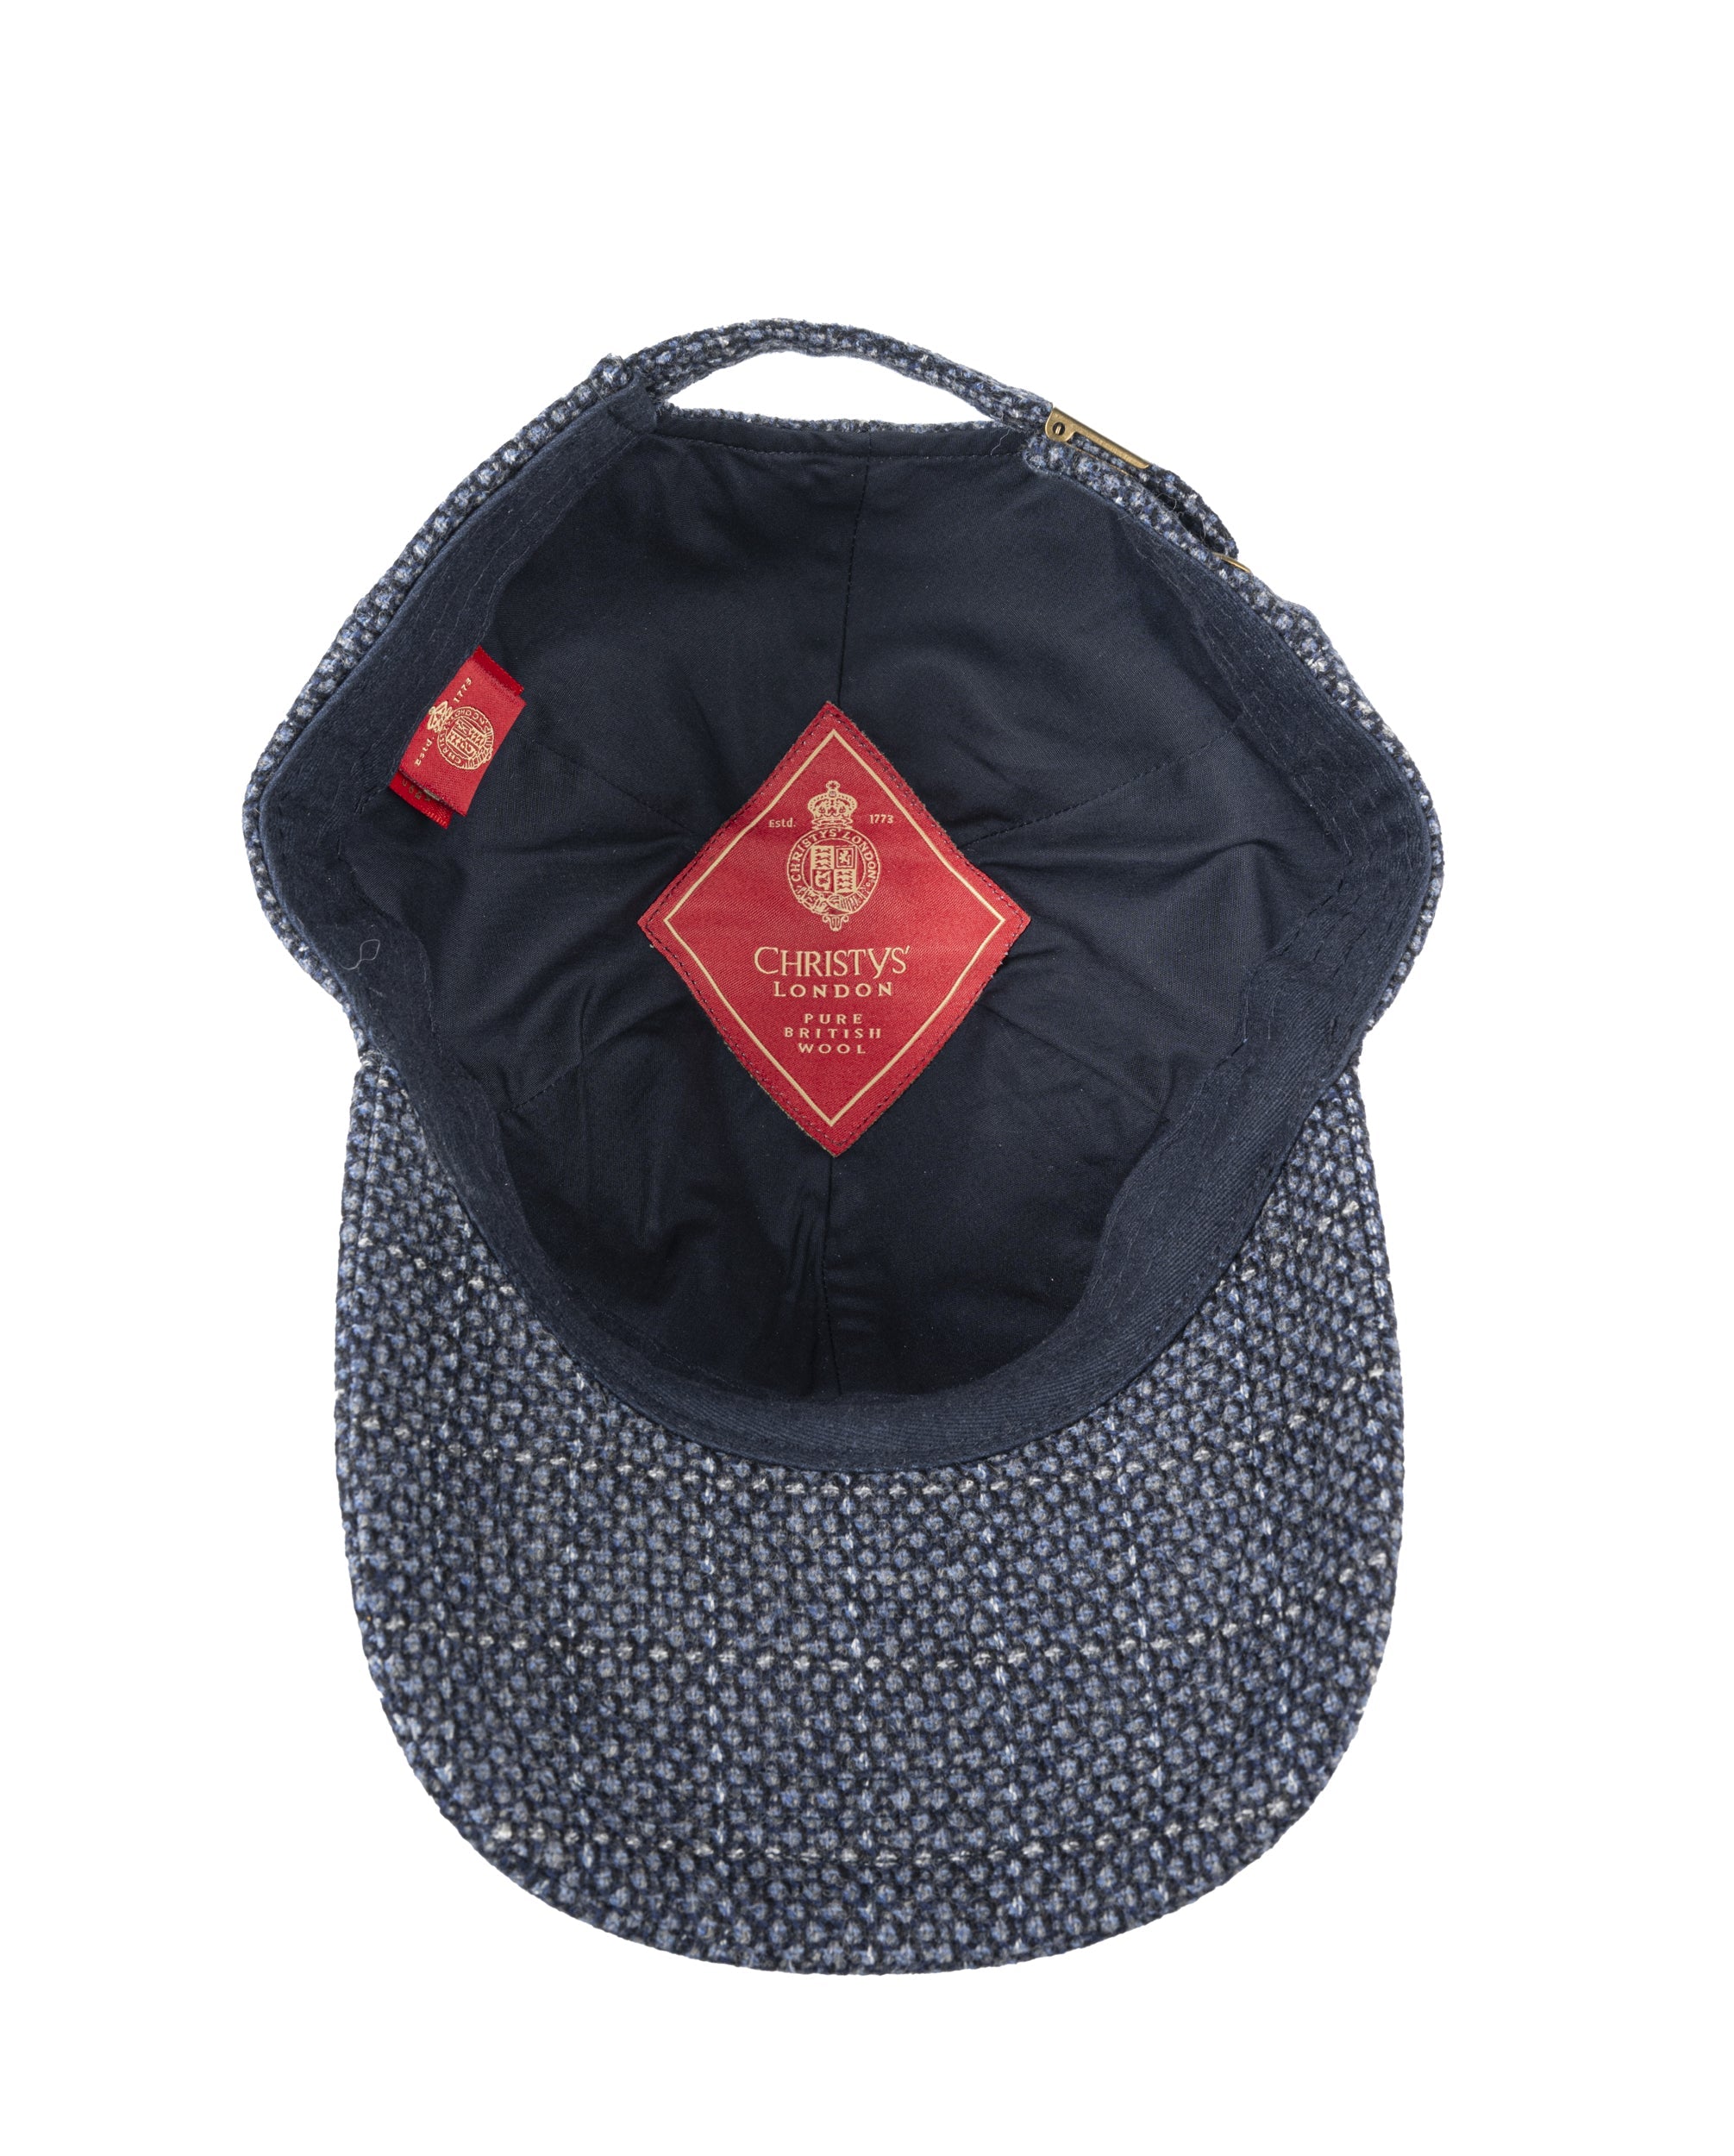 Reflective Navy Tweed Baseball Cap with one size adjuster